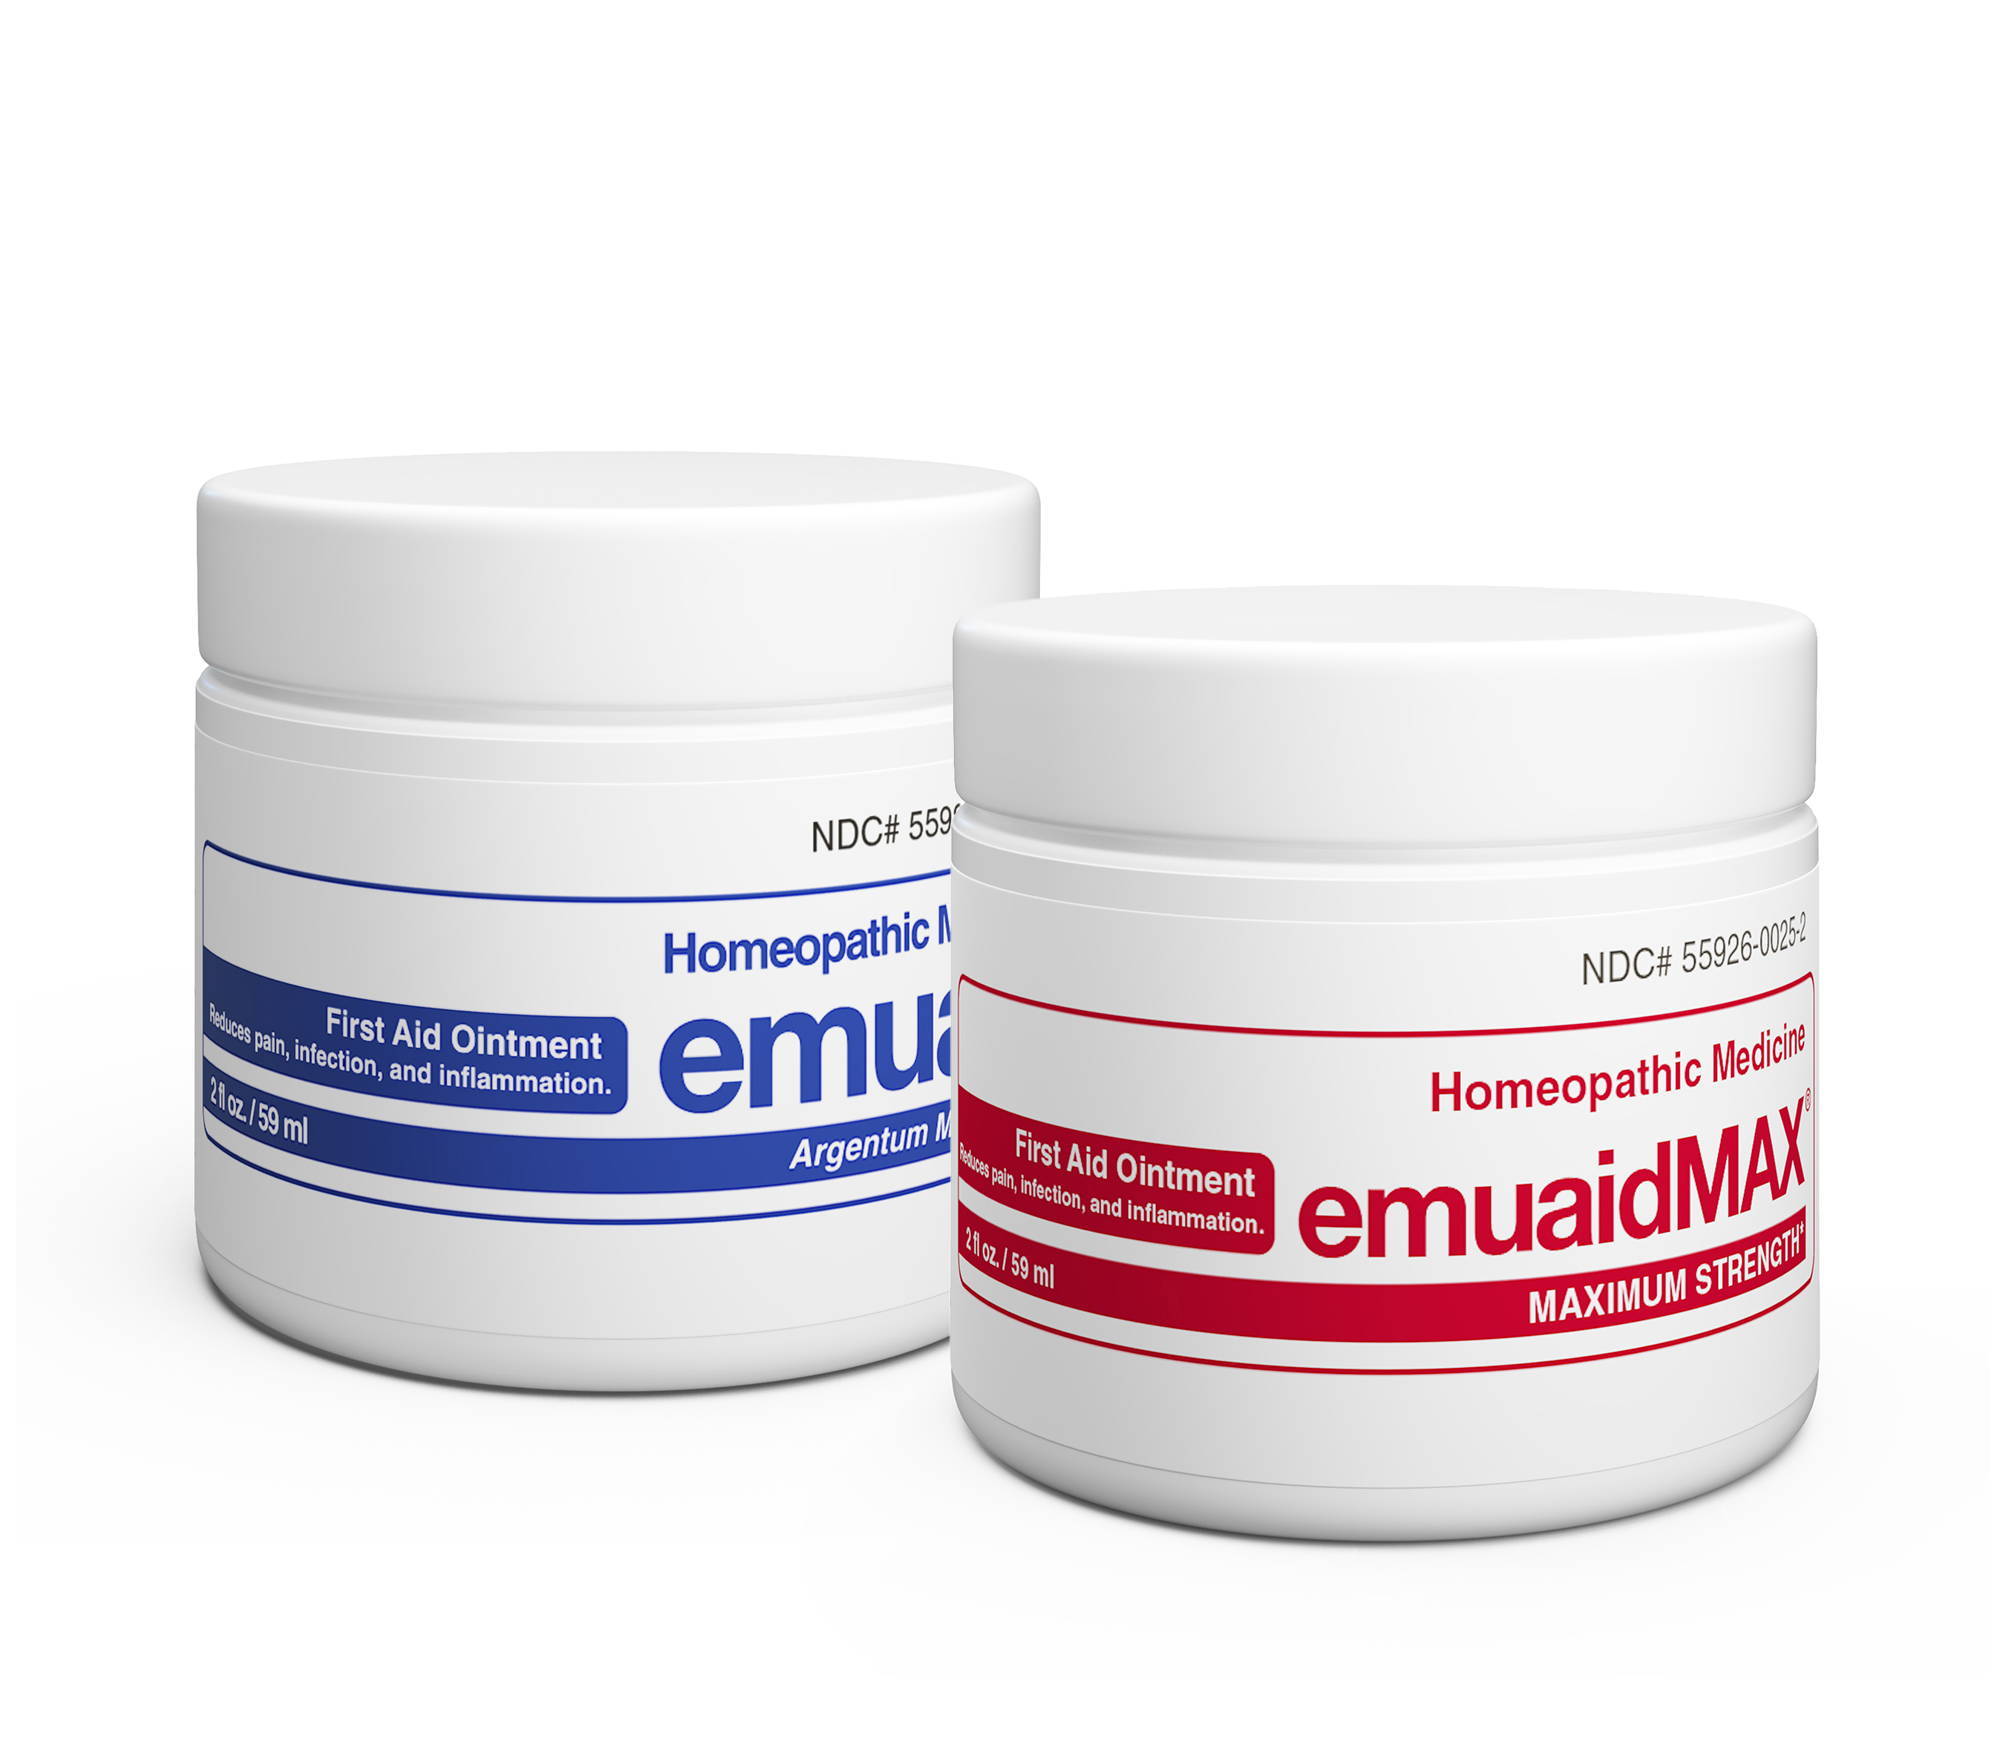 A picture of EMUAID and EMUAIDMAX ointment